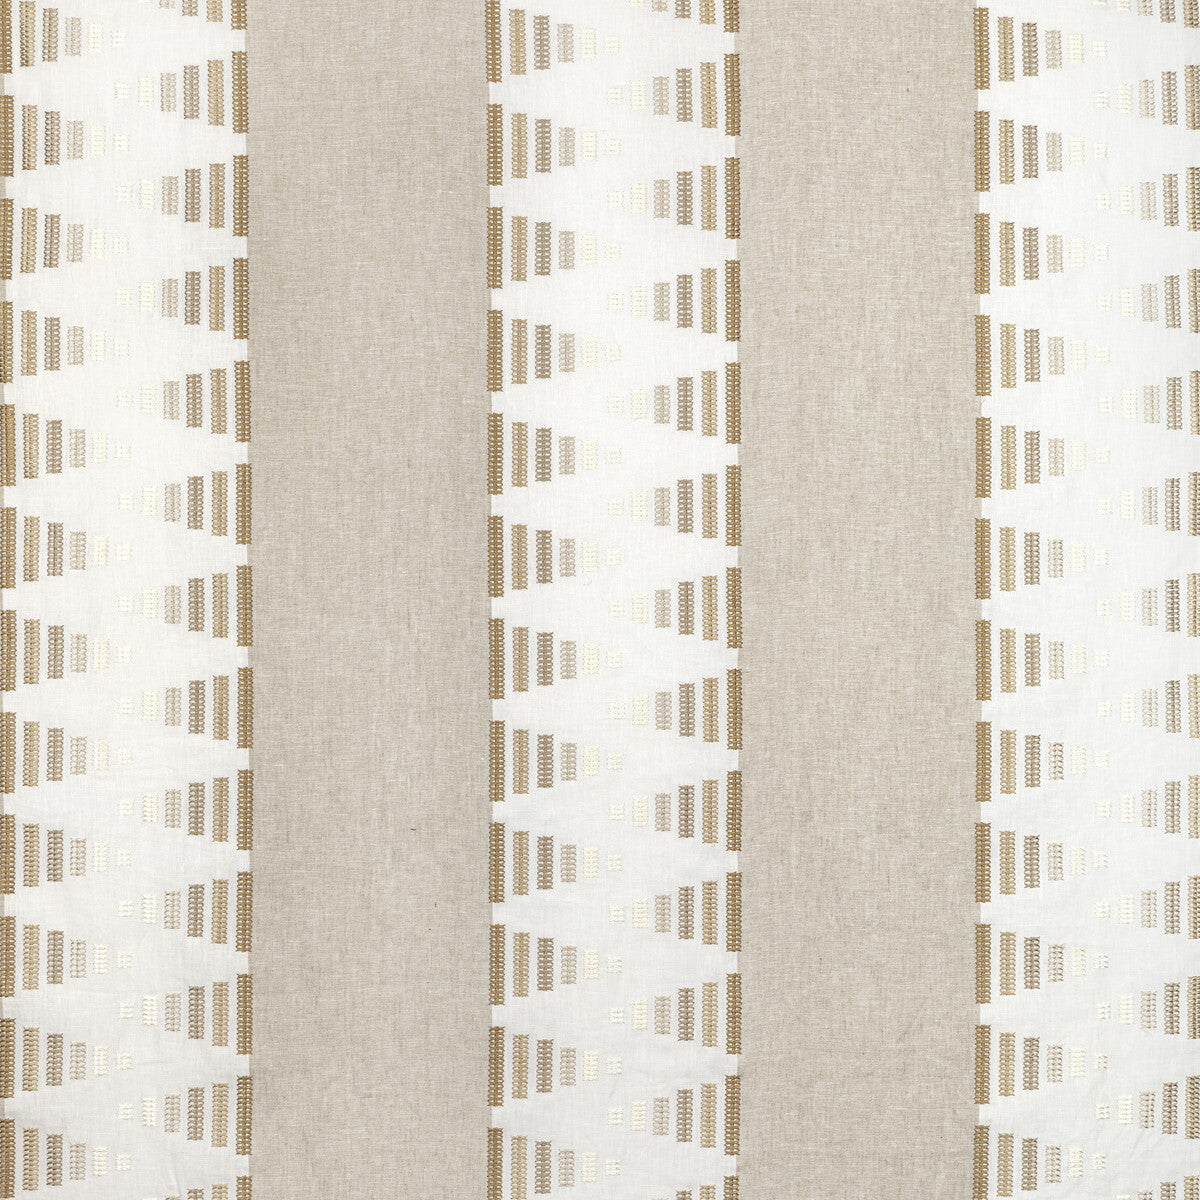 Joined Forces fabric in honey color - pattern 36353.416.0 - by Kravet Couture in the Modern Luxe III collection